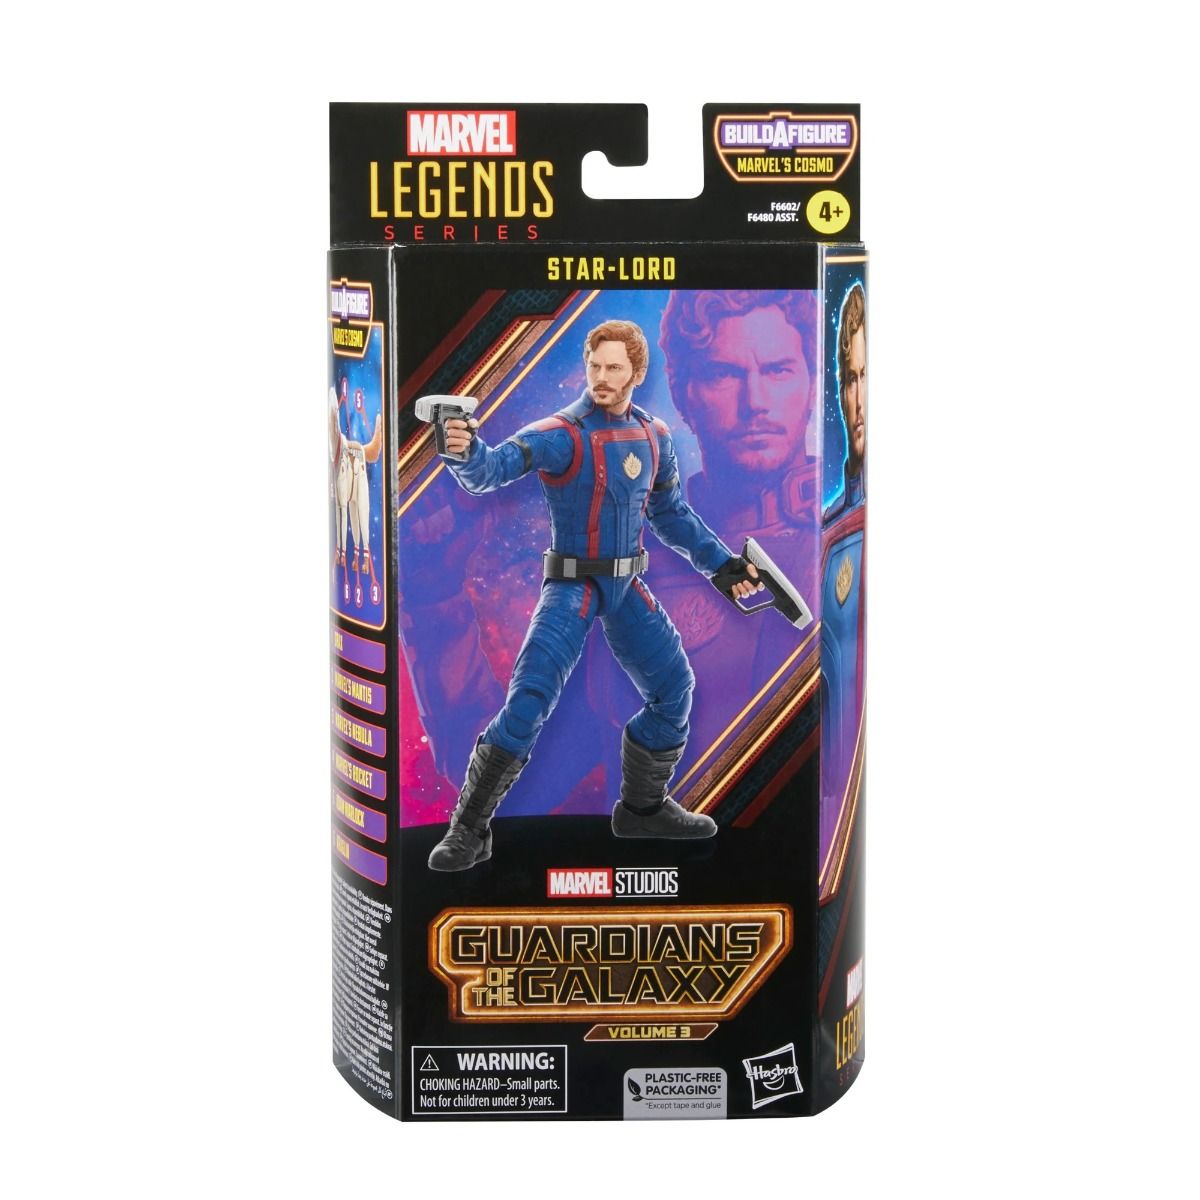 Marvel Legends BAF Marvel's Cosmo GotG vol 3 Star-Lord 6-Inch Action Figure画像